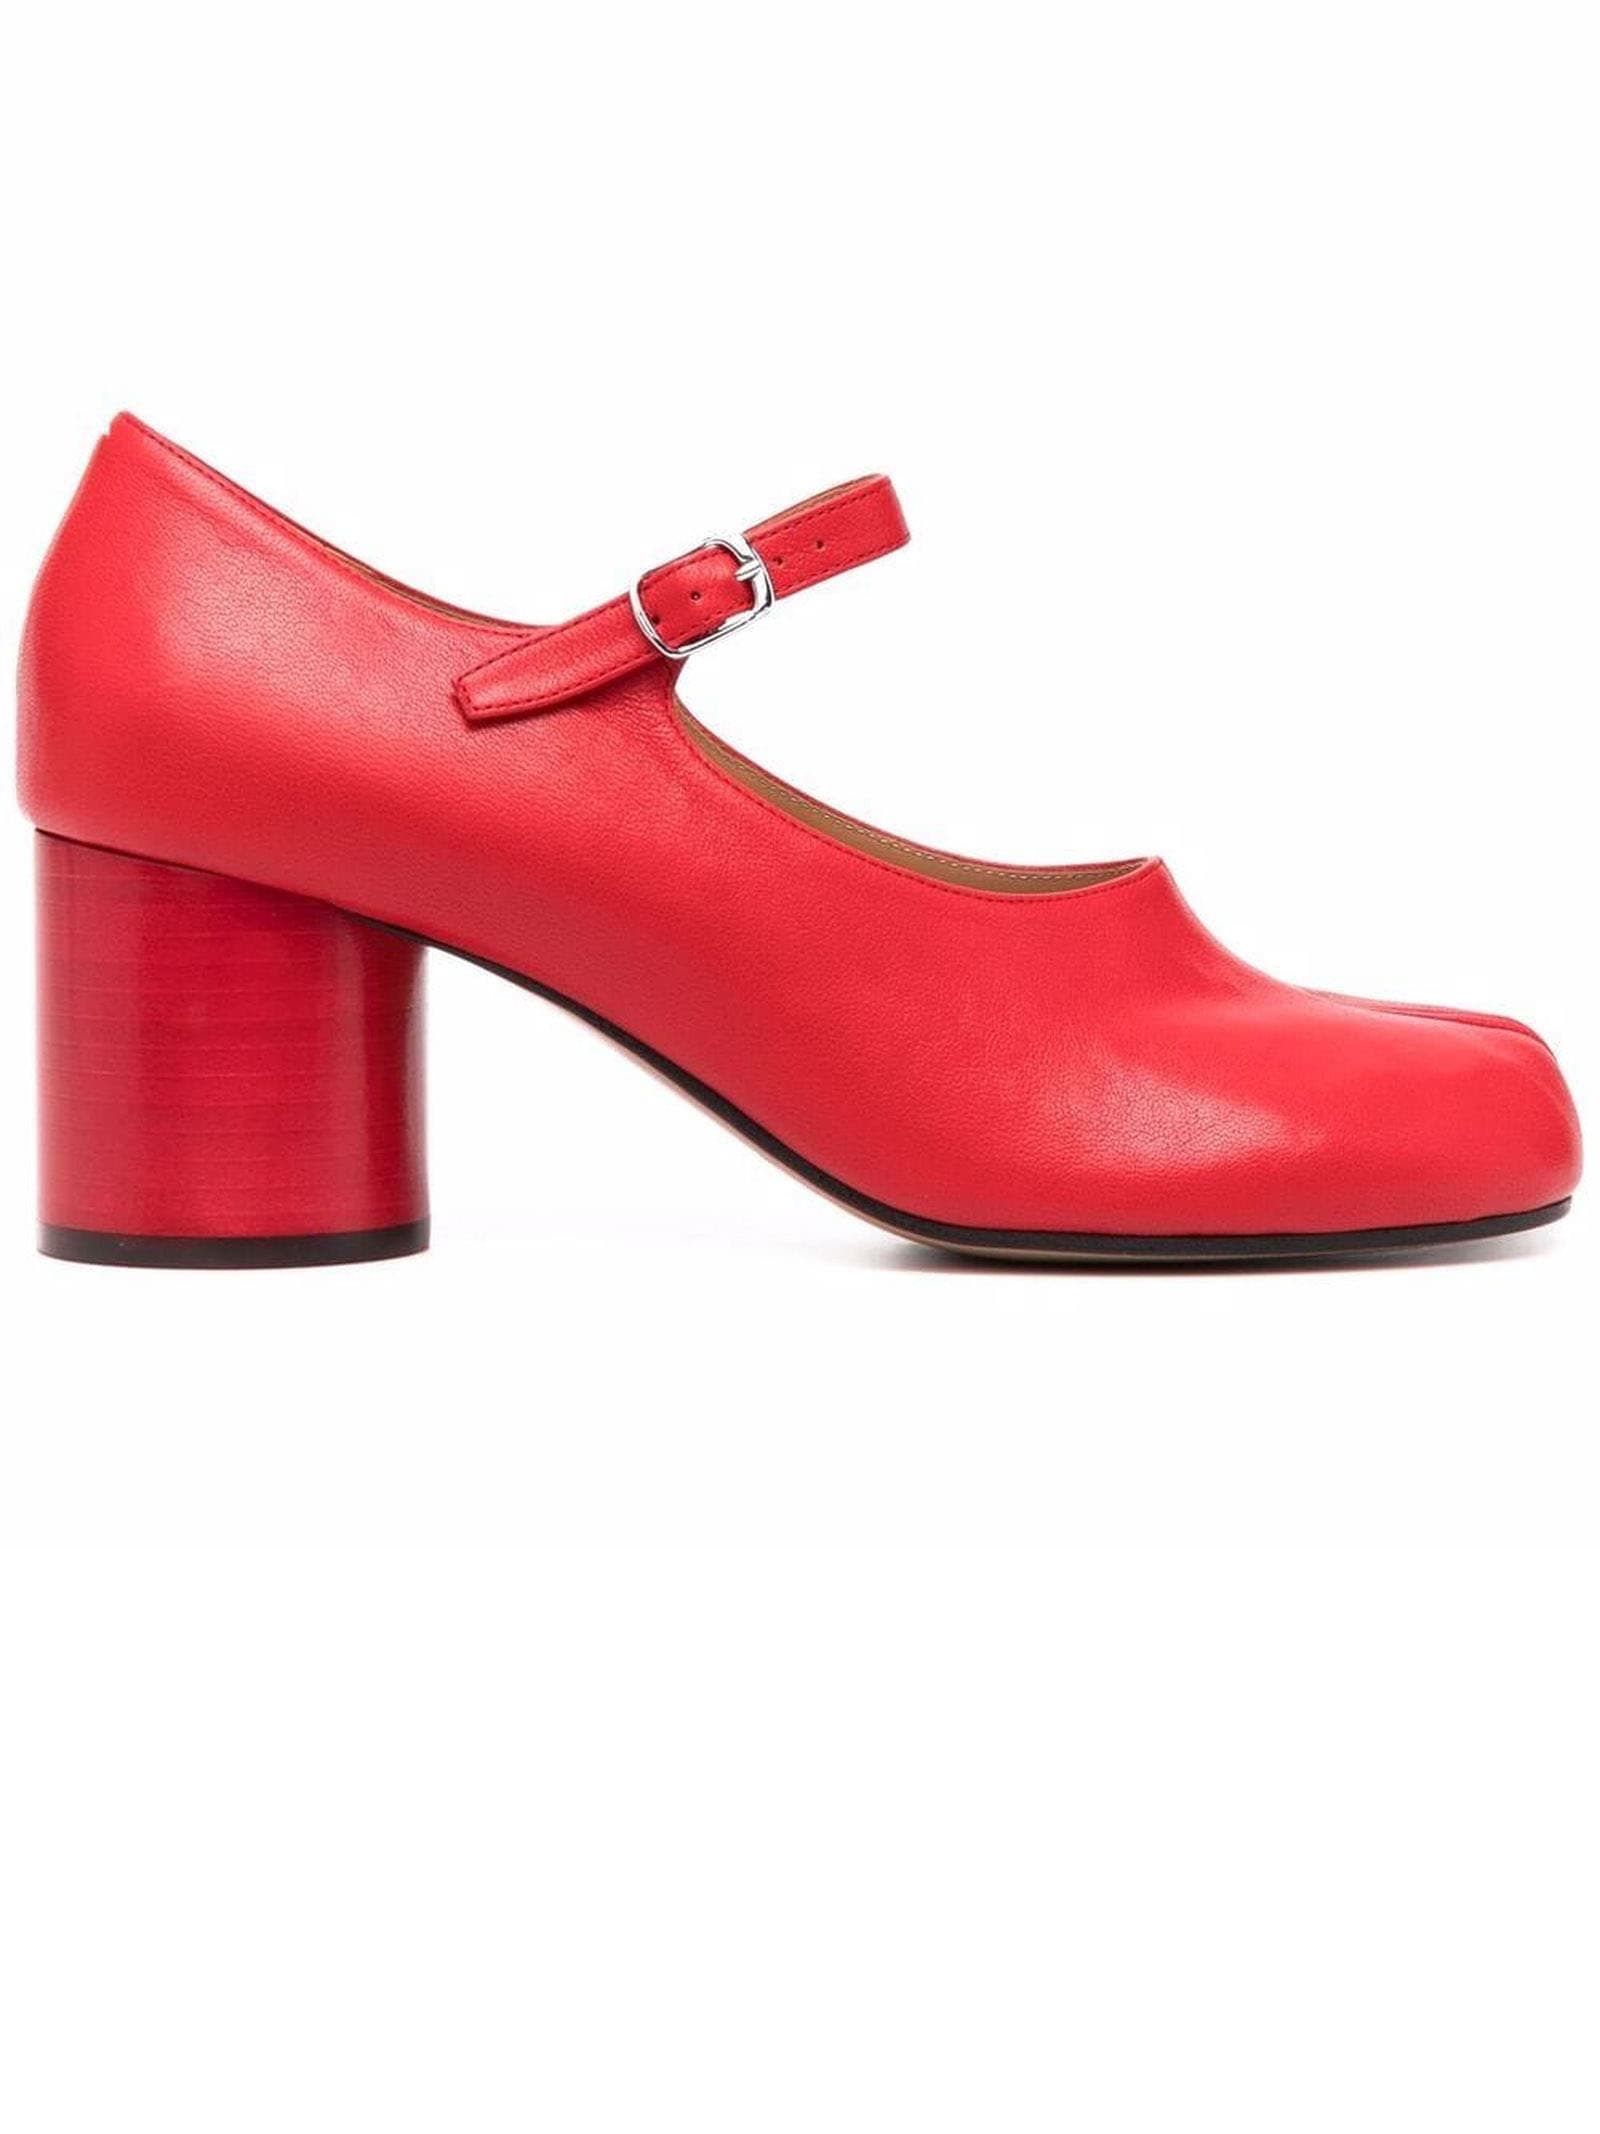 Maison Margiela Mary-jane Shoes In Red Vintage Soft Leather